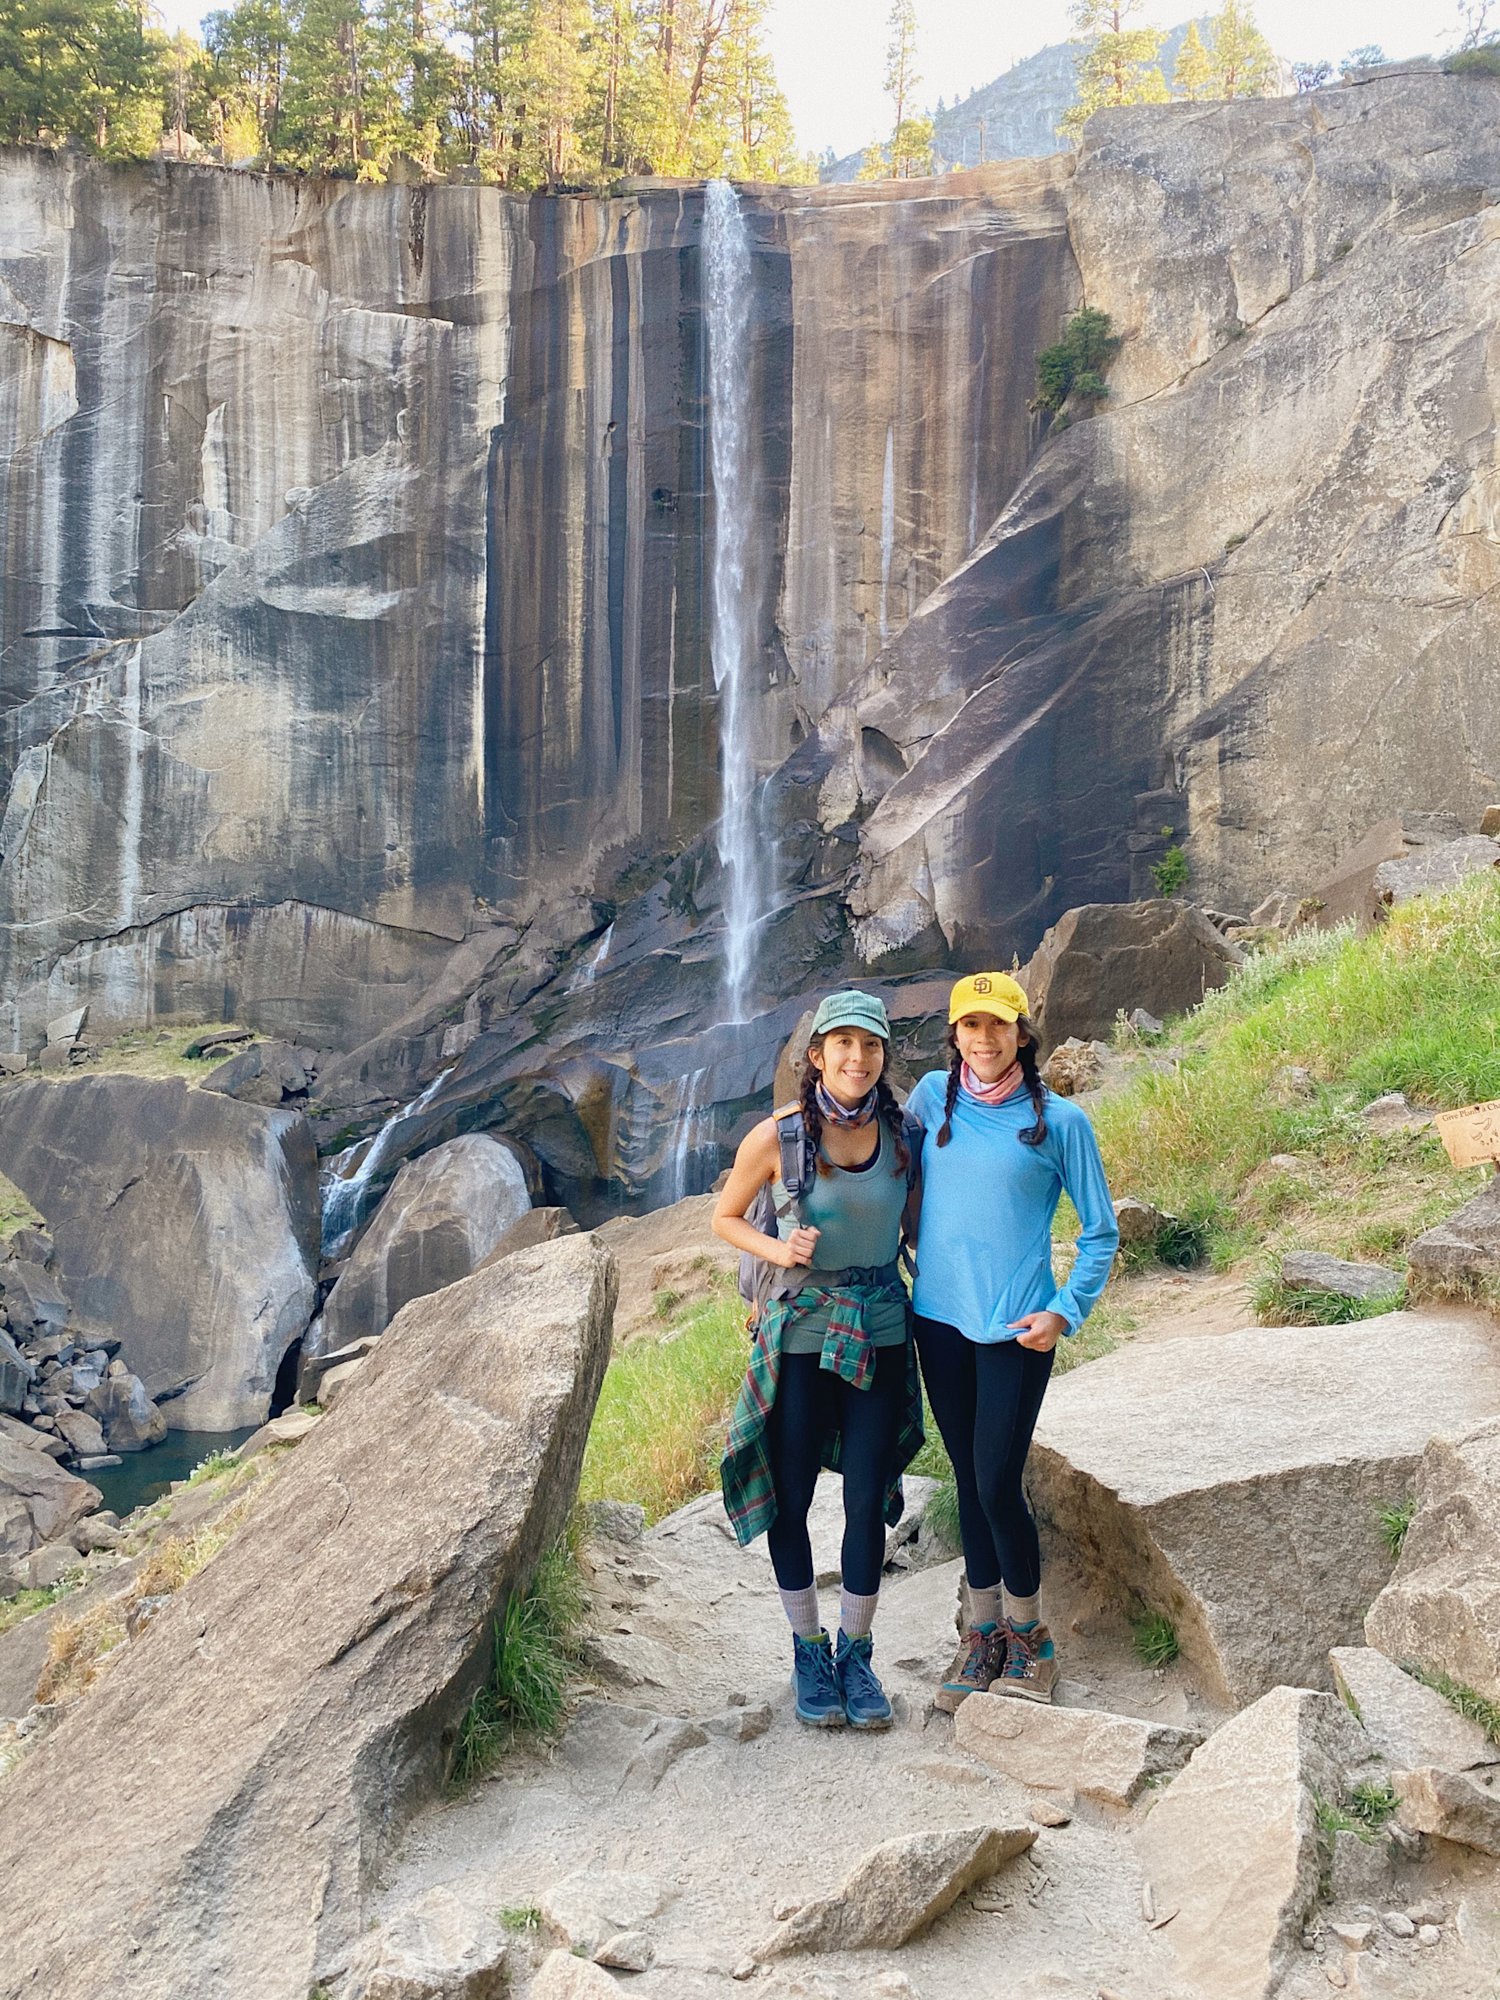 Day Hike to Vernal Falls in Yosemite National Park